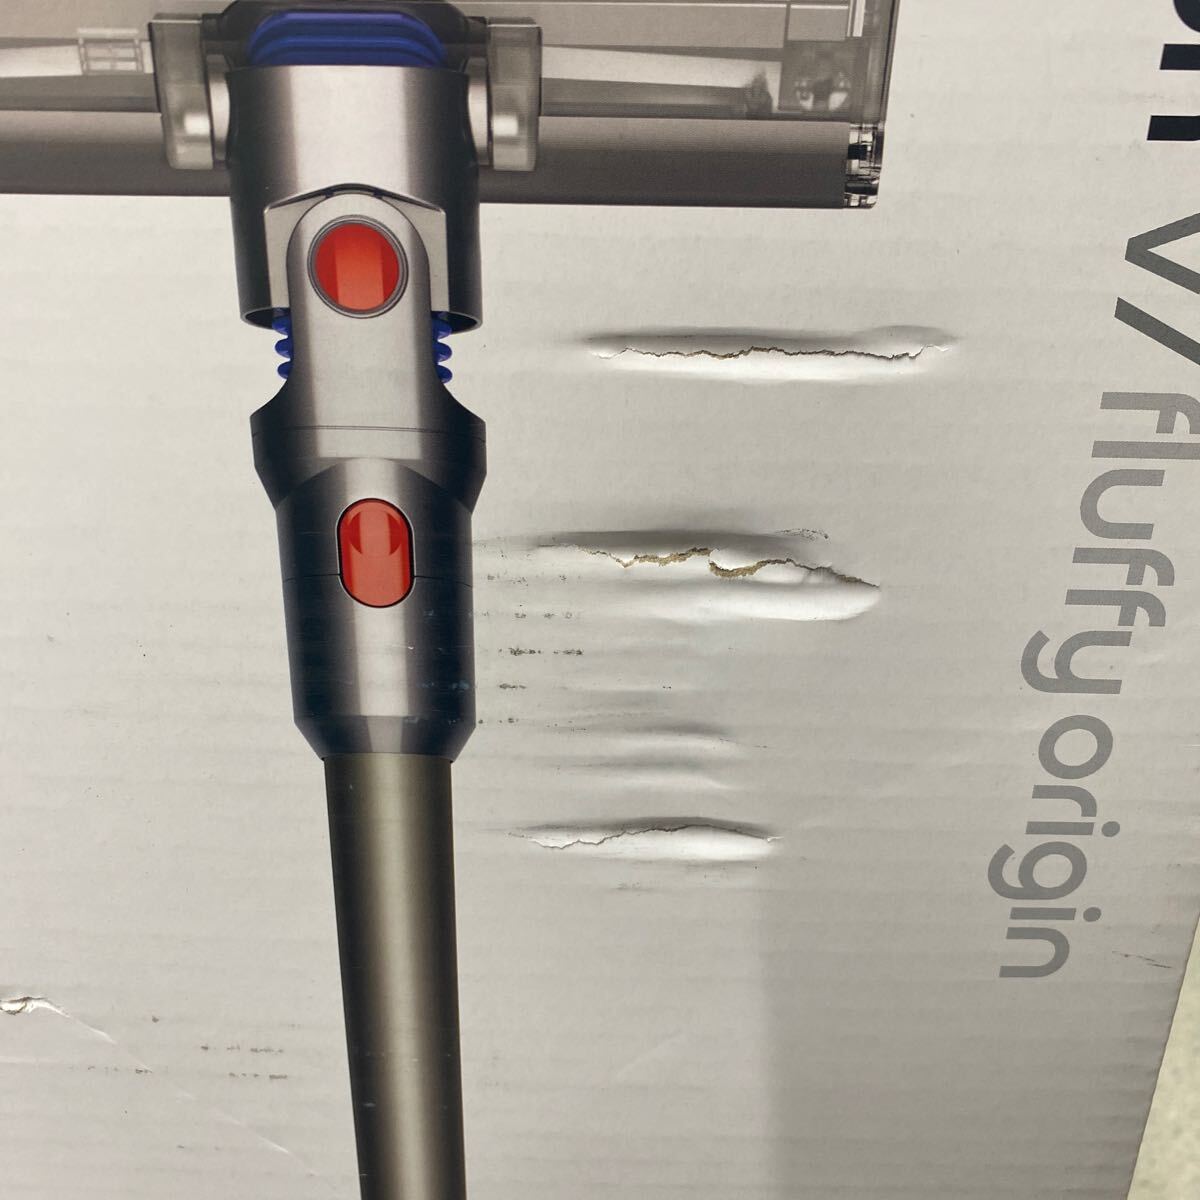 S4201/[ private person storage goods ] Dyson v7 cordless cleaner sv11 rechargeable 350W vacuum cleaner consumer electronics unused 